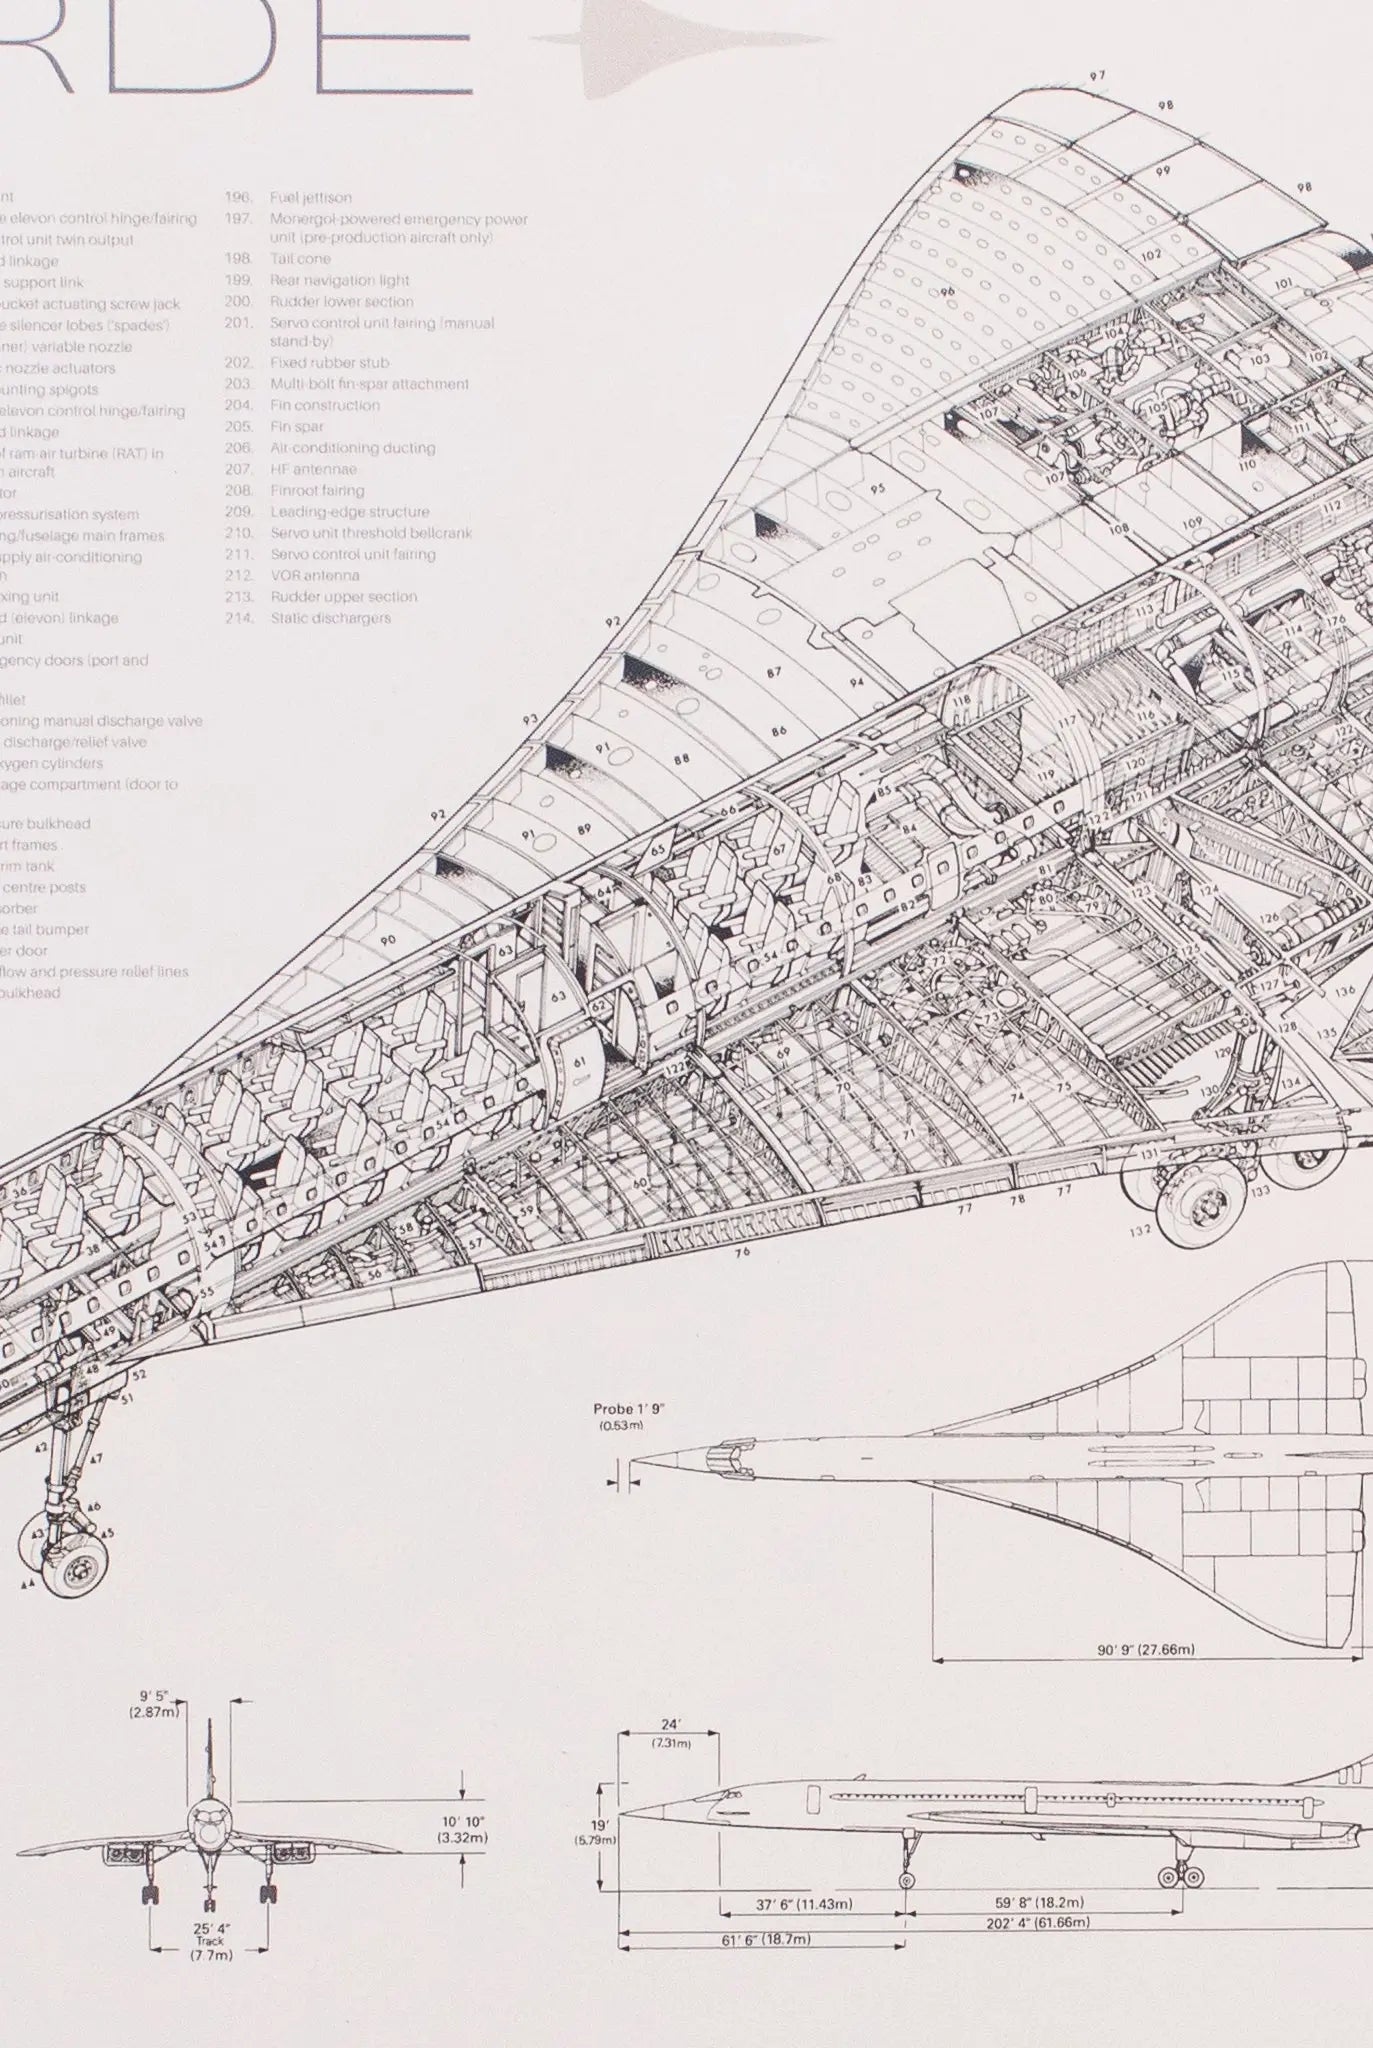 Concorde Supersonic Airliner Schematic – Stemcell Science Shop